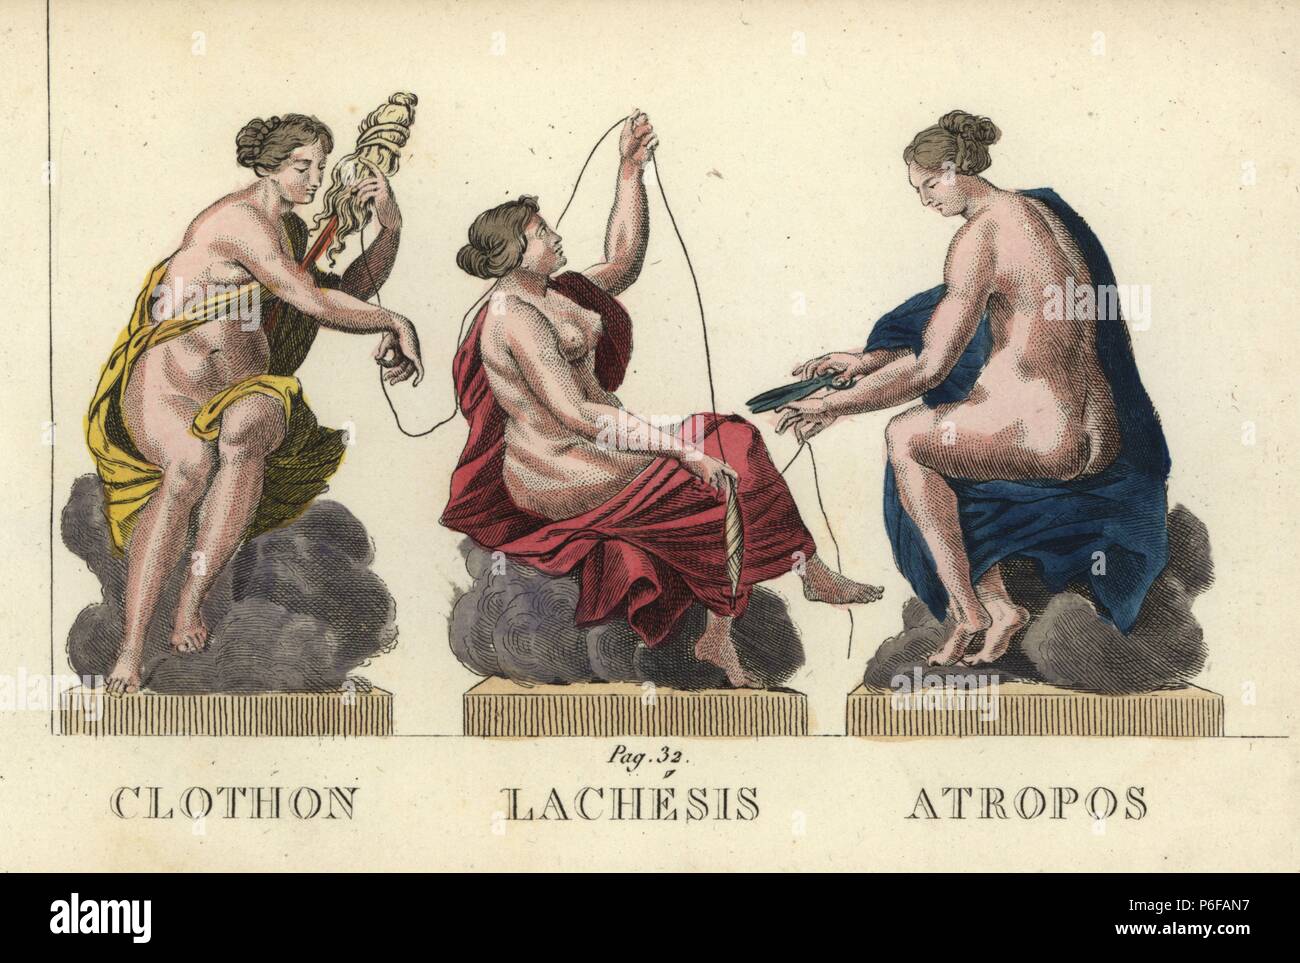 Clotho, Lachesis and Atropos, the Greek Fates or Moirai. Handcoloured copperplate engraving engraved by Jacques Louis Constant Lacerf after illustrations by Leonard Defraine from 'La Mythologie en Estampes' (Mythology in Prints, or Figures of Fabled Gods), Chez P. Blanchard, Paris, c.1820. Stock Photo